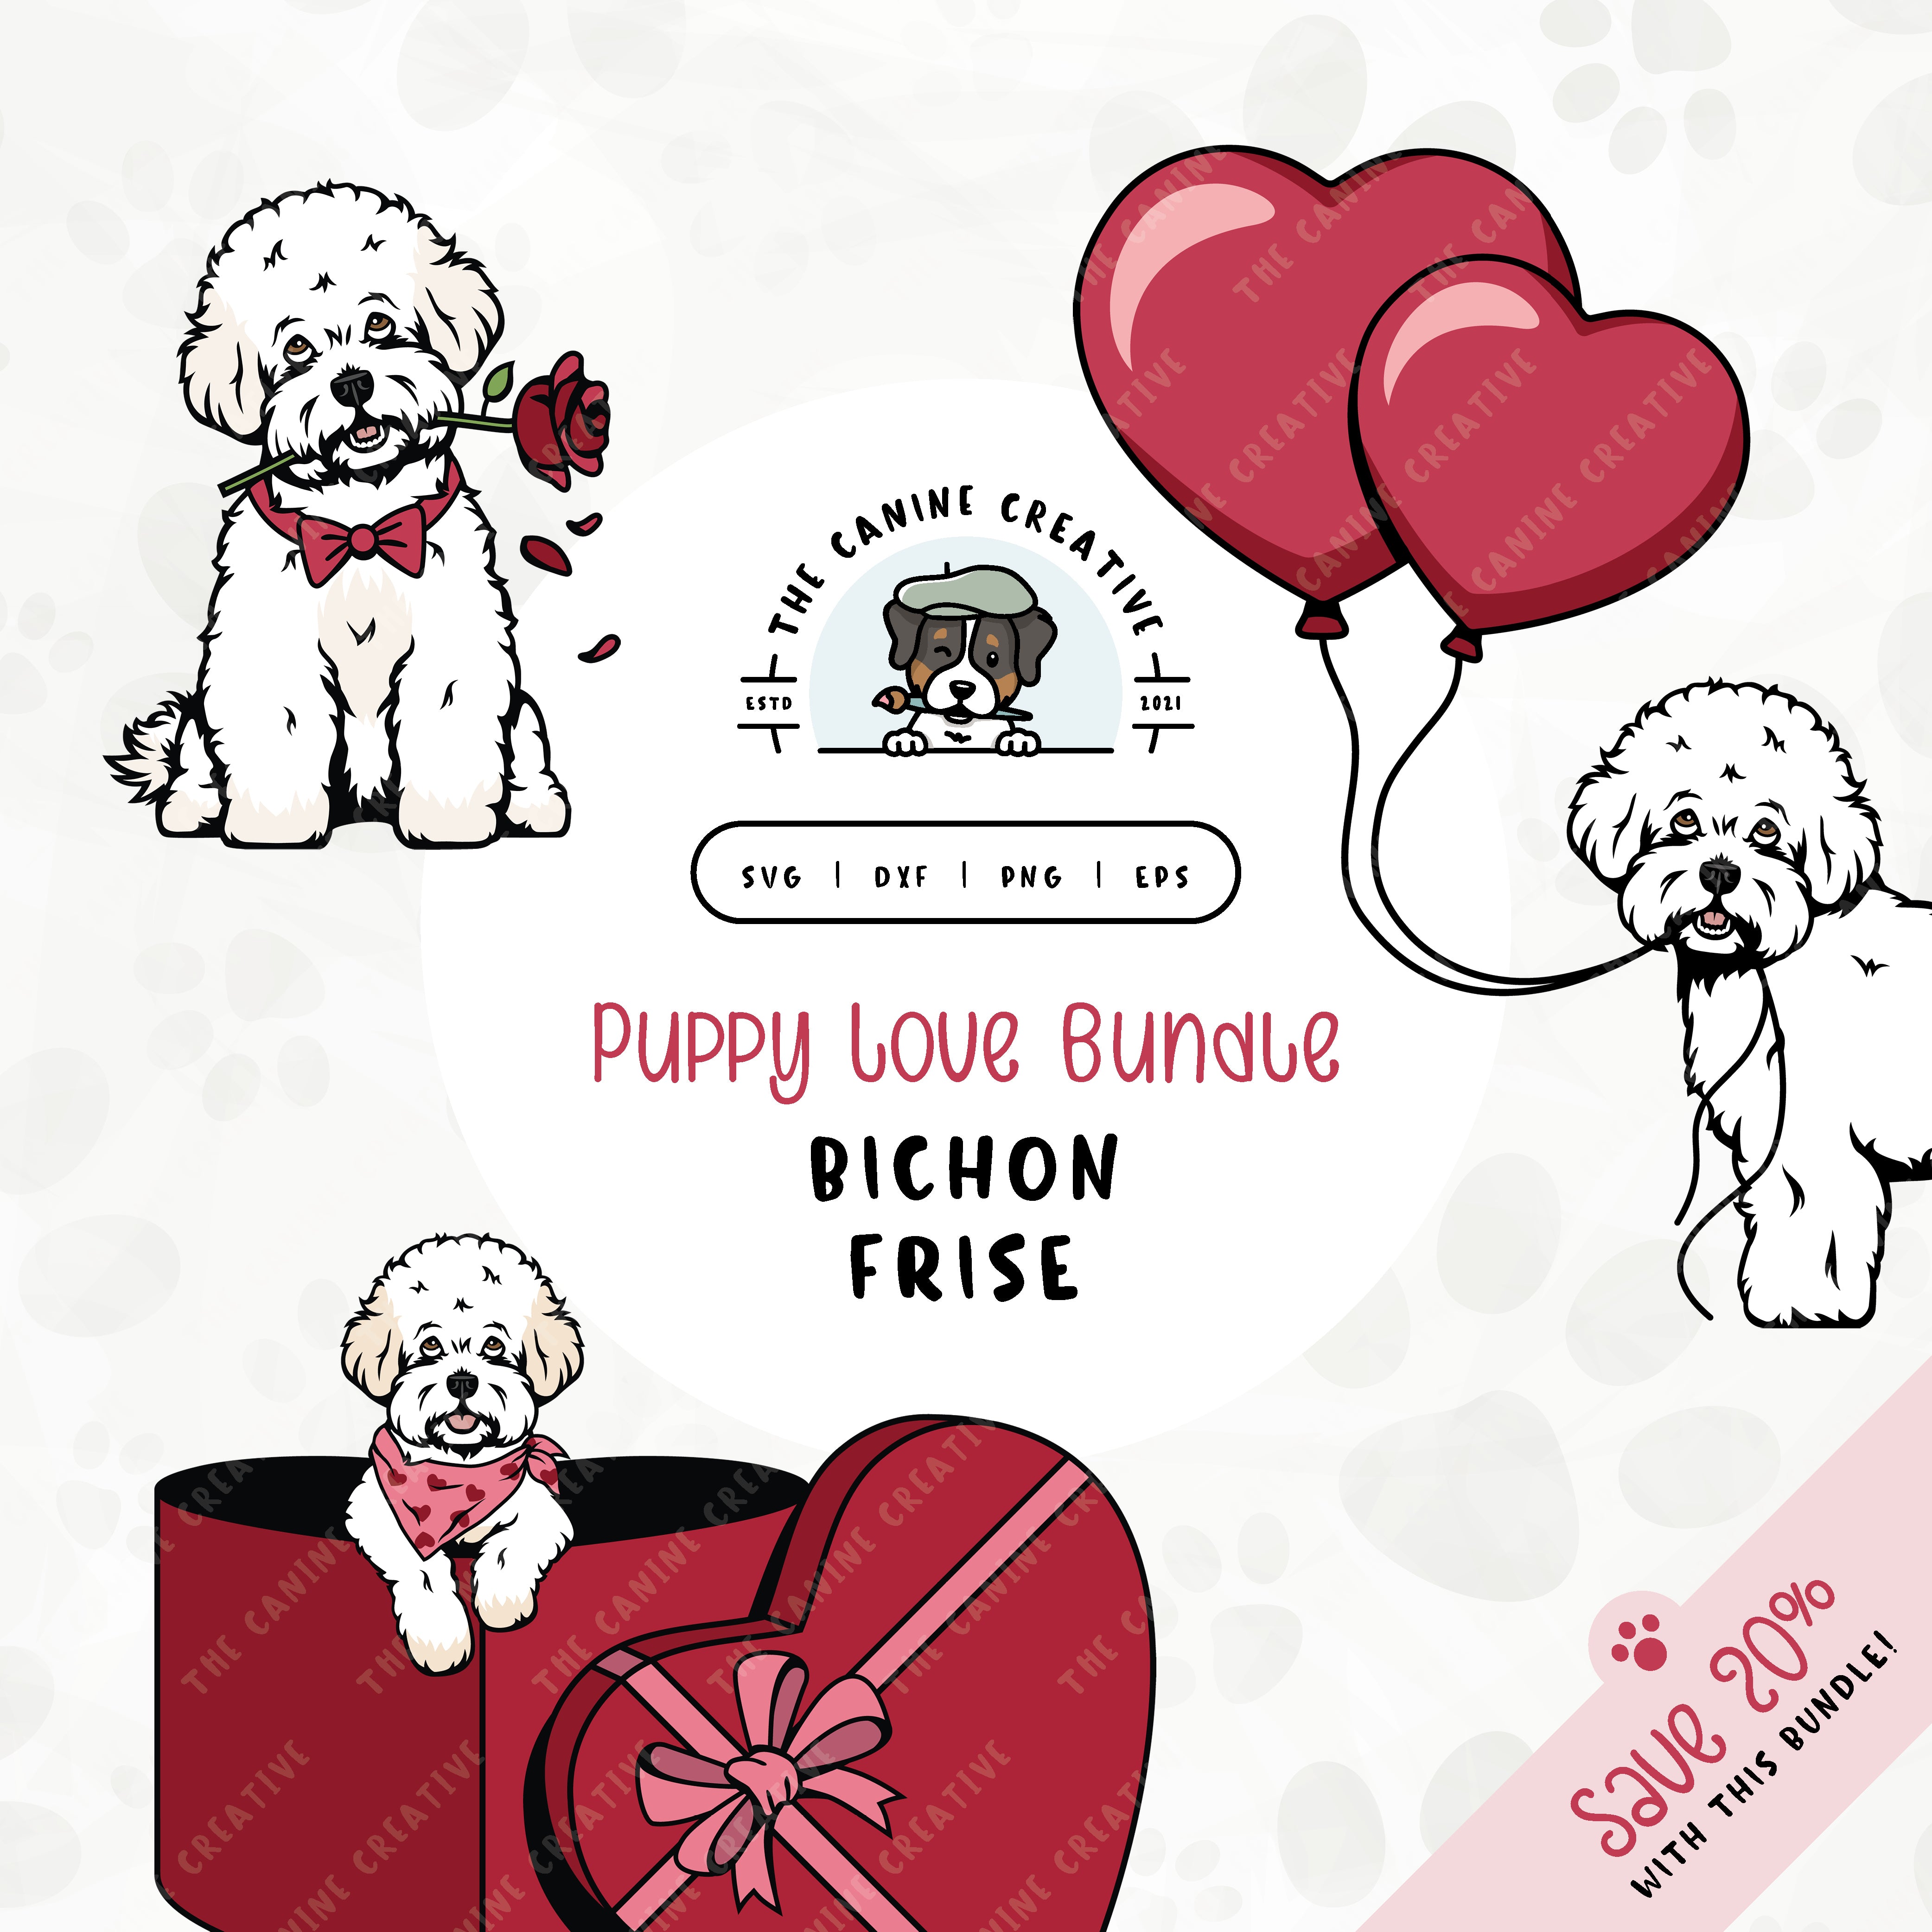 This 3-pack puppy love illustration bundle features Bichons Frises holding heart balloons, peeking out of a heart-shaped box, and holding a rose. File formats include: SVG, DXF, PNG, and EPS.